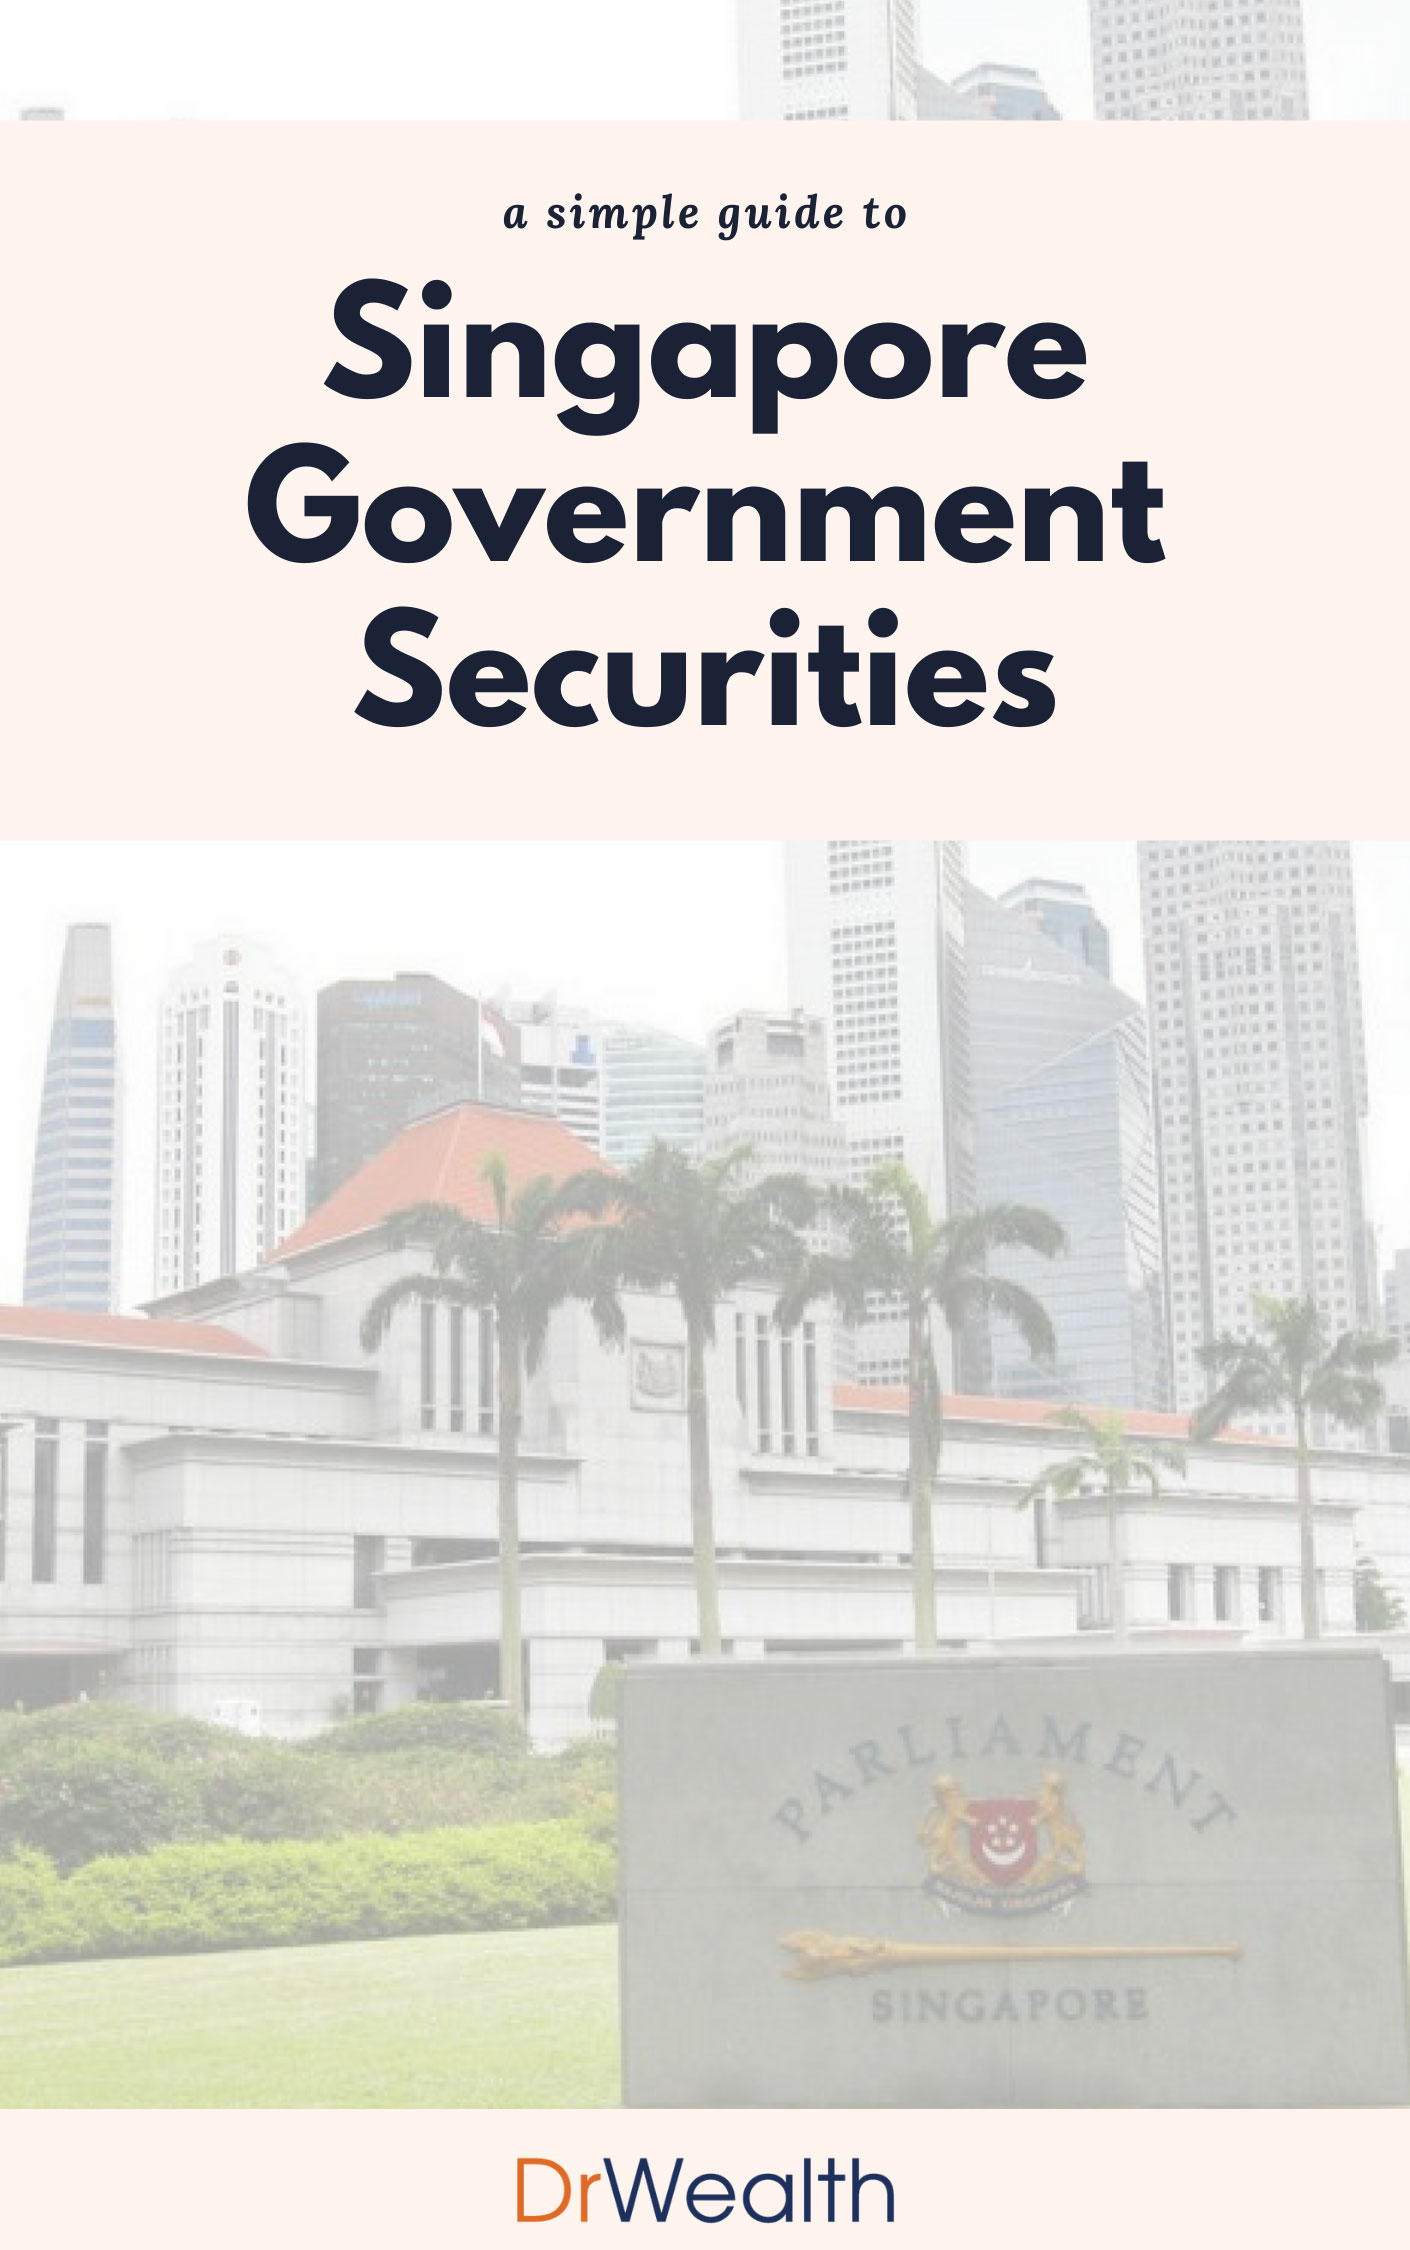 Simple Guide to Singapore Government Securities